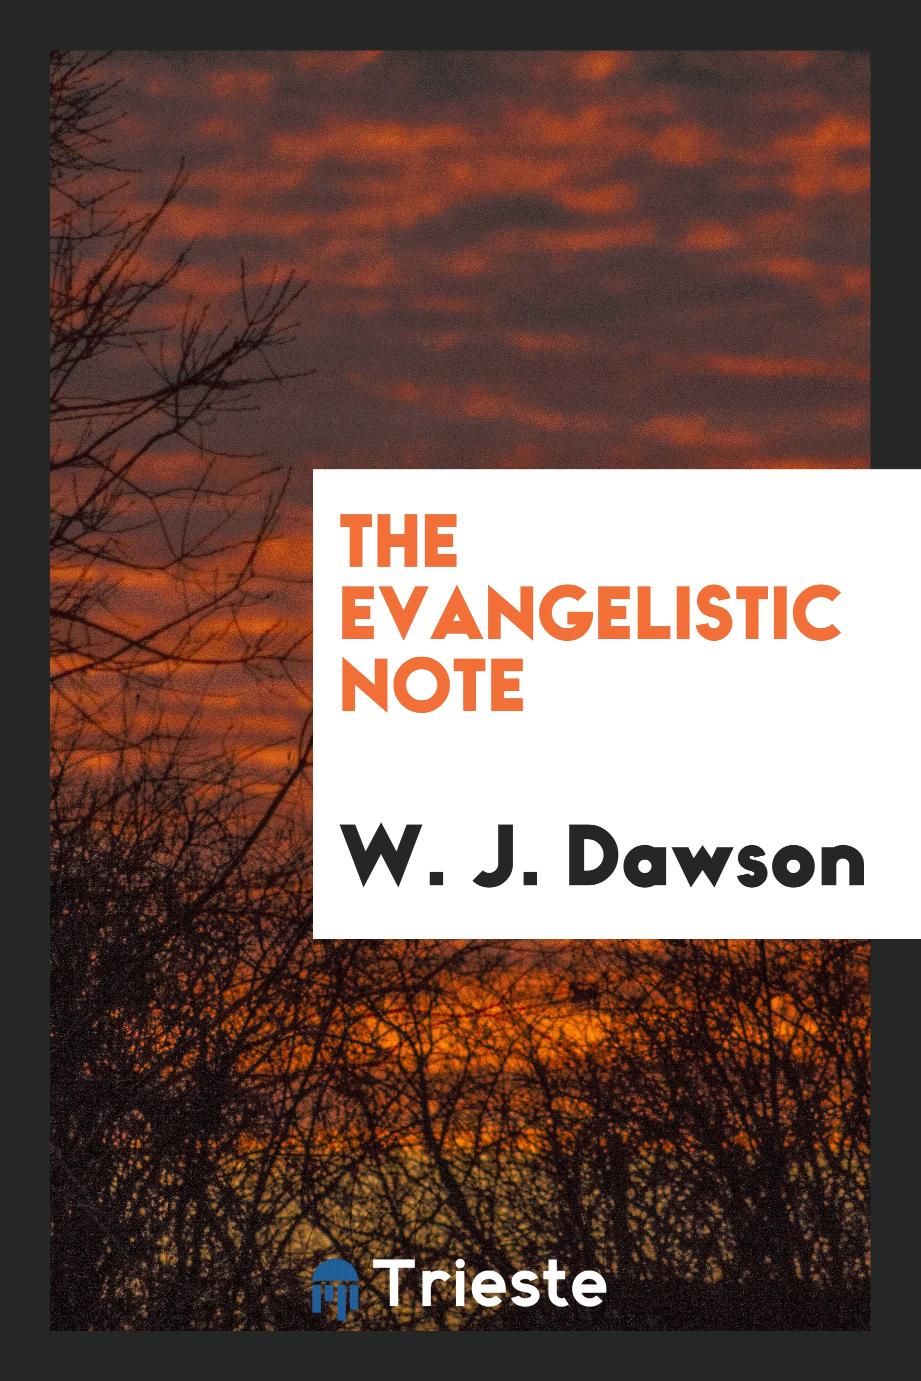 The evangelistic note